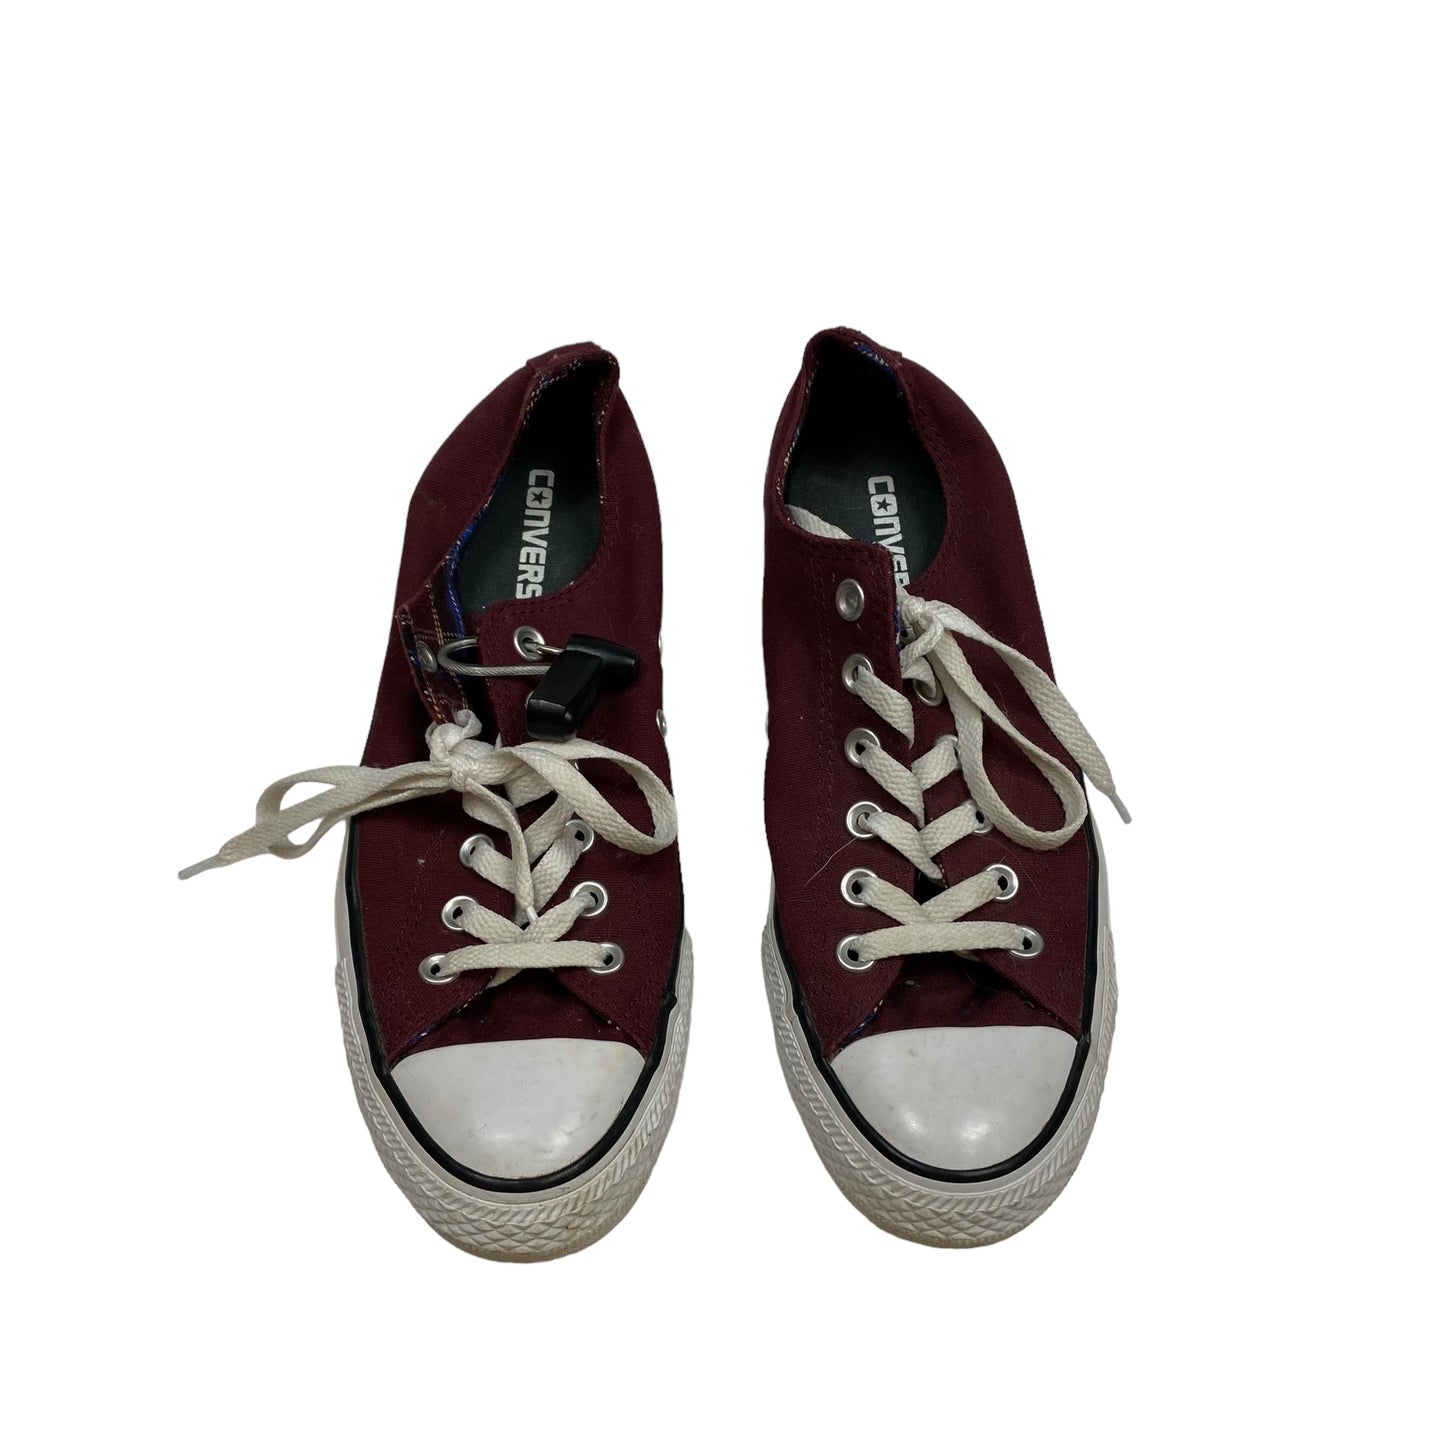 Red Shoes Sneakers Converse, Size 9